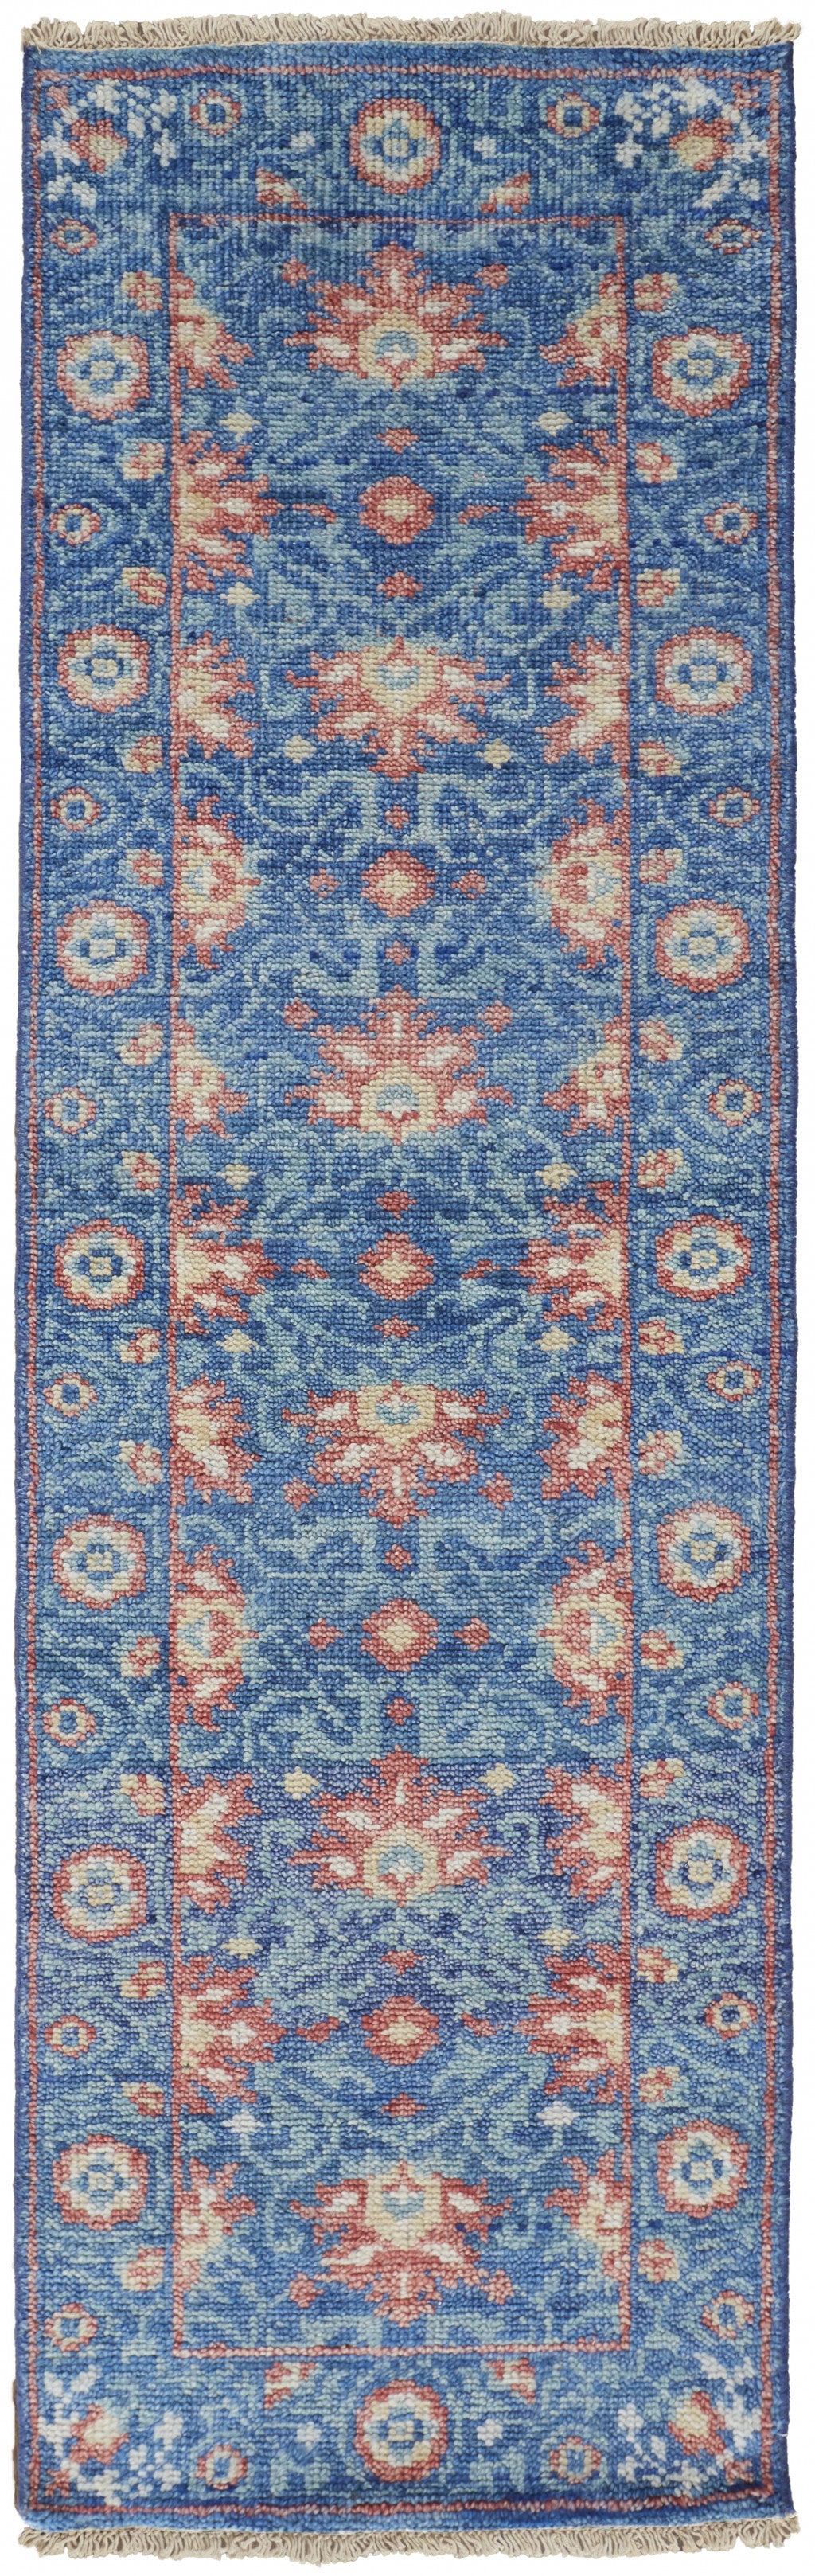 2' X 3' Blue And Red Wool Floral Hand Knotted Stain Resistant Area Rug